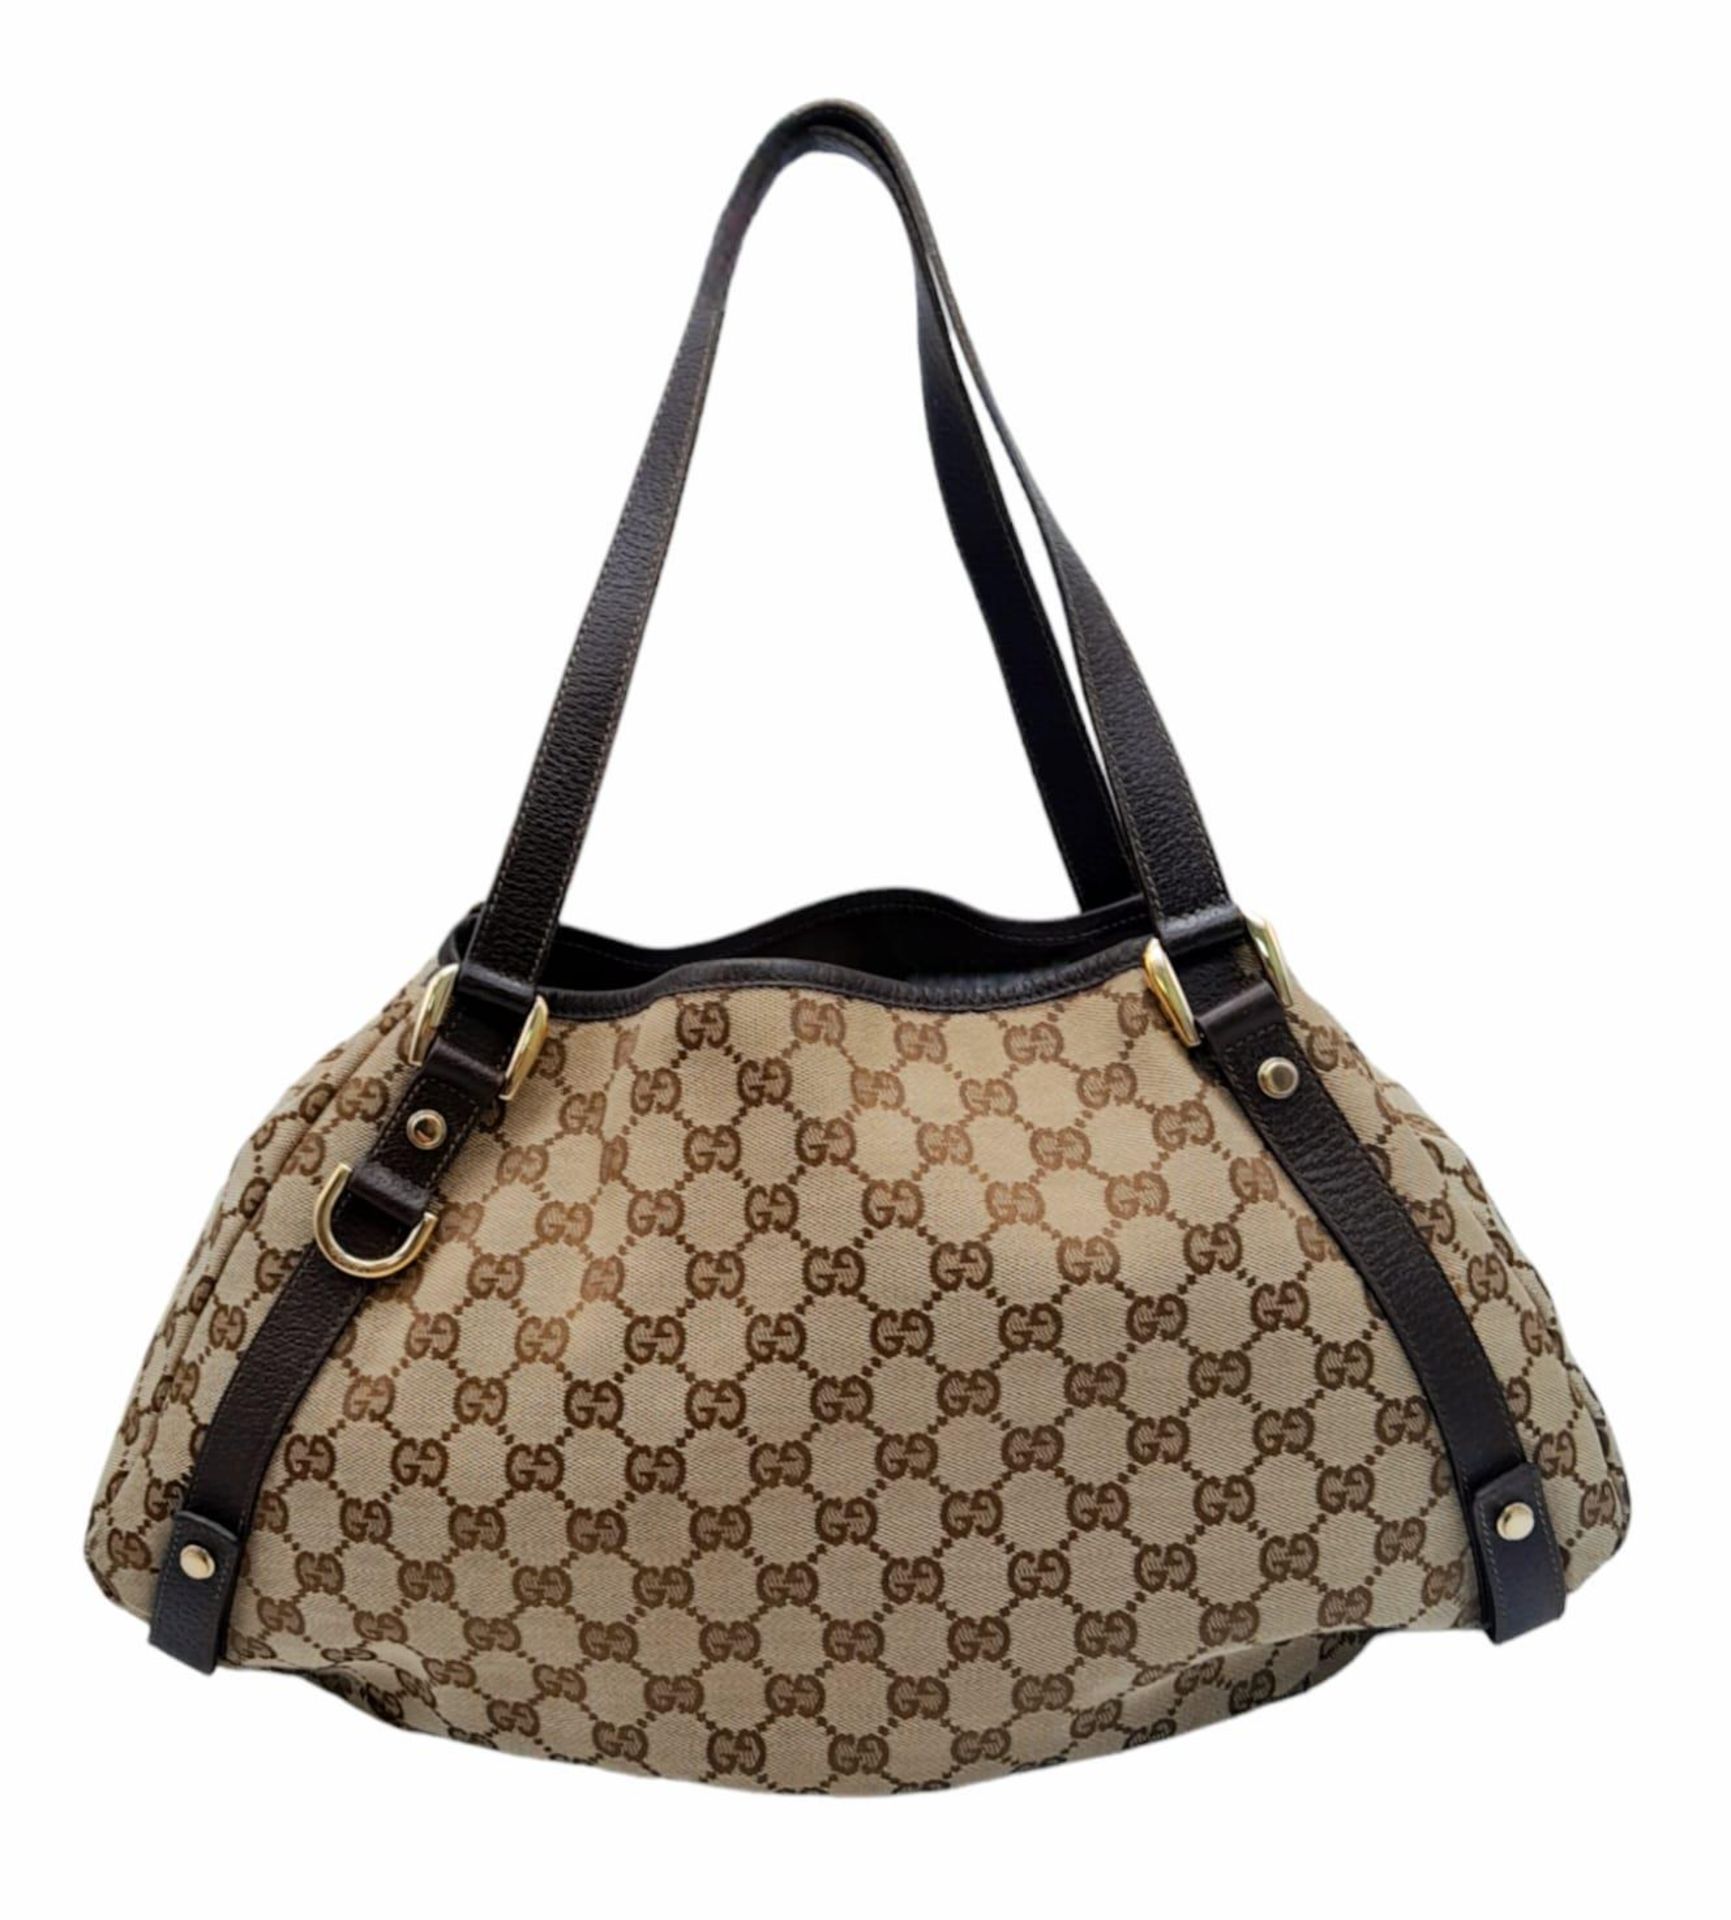 A Gucci Brown Monogram 'Abbey' Shoulder Bag. Canvas exterior with leather trim, gold-toned hardware,